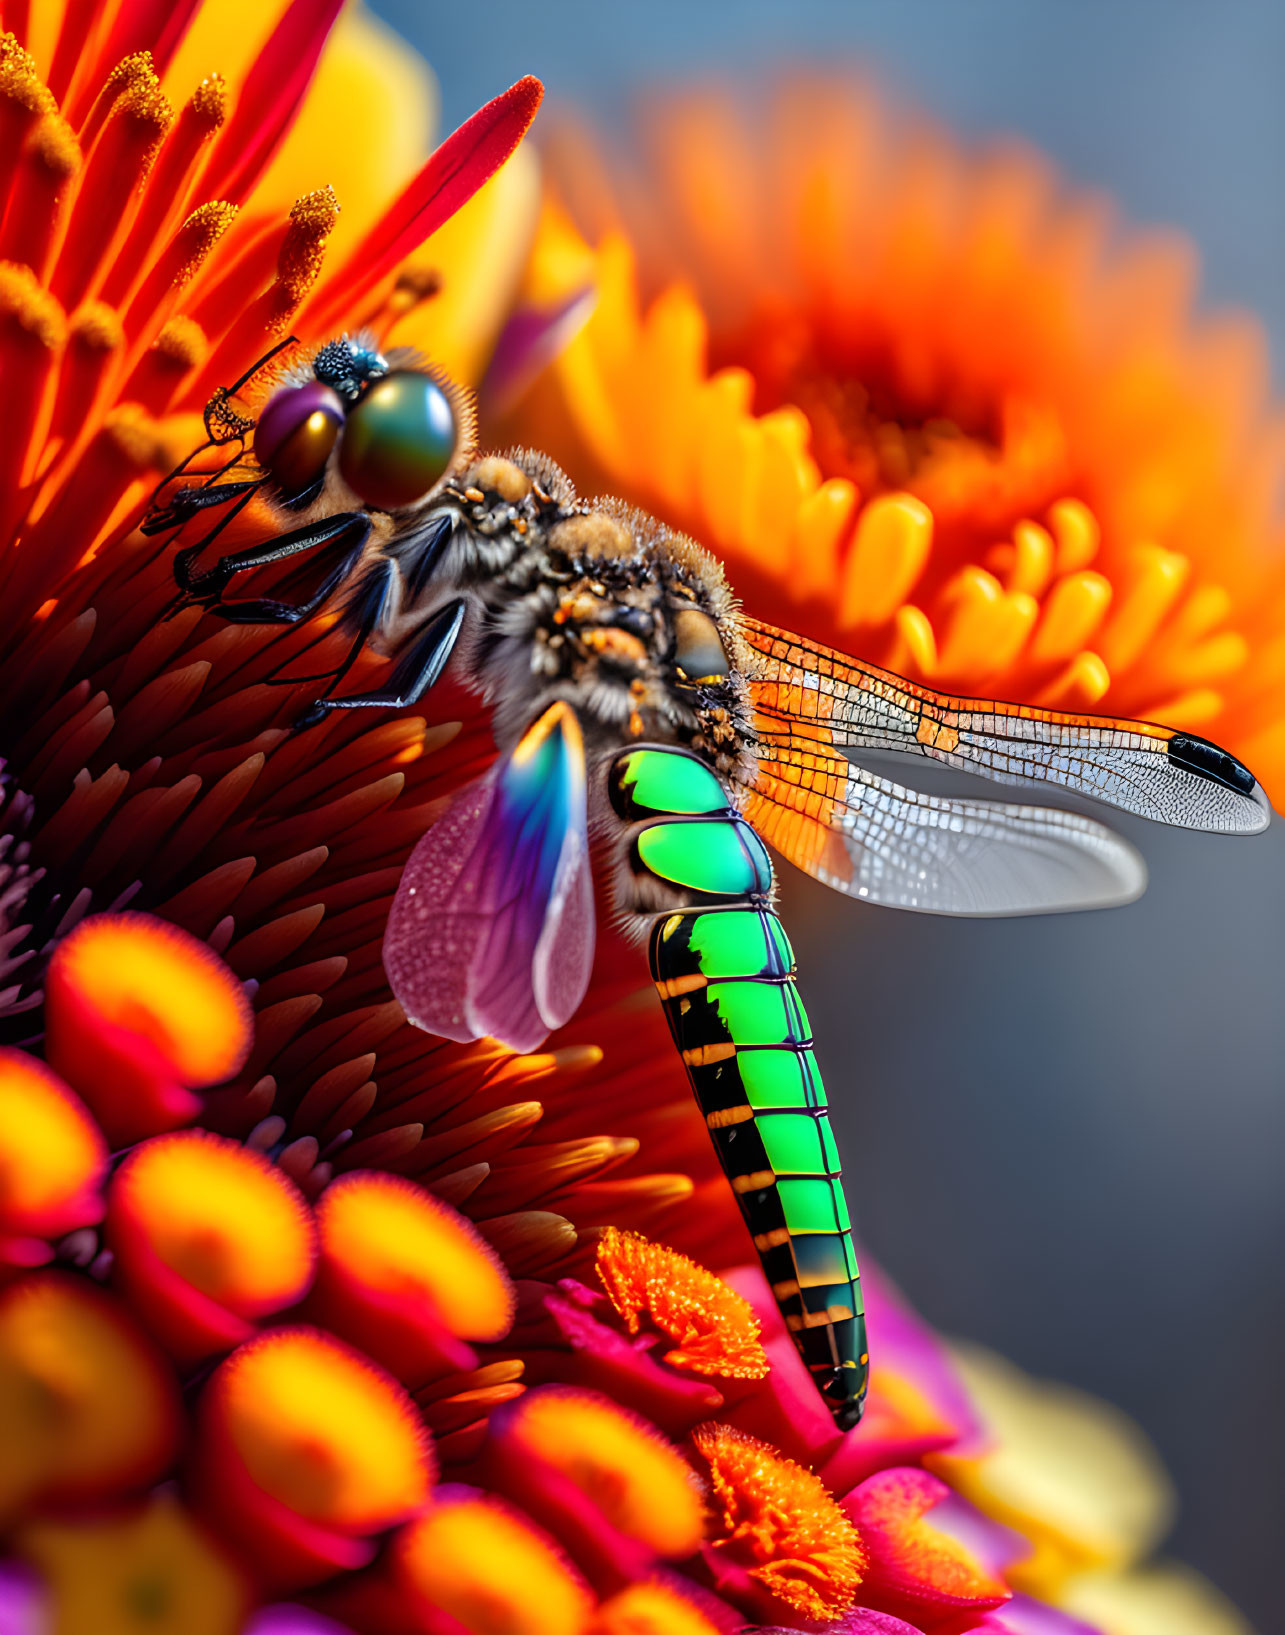 Vibrant dragonfly on colorful flower with intricate wings